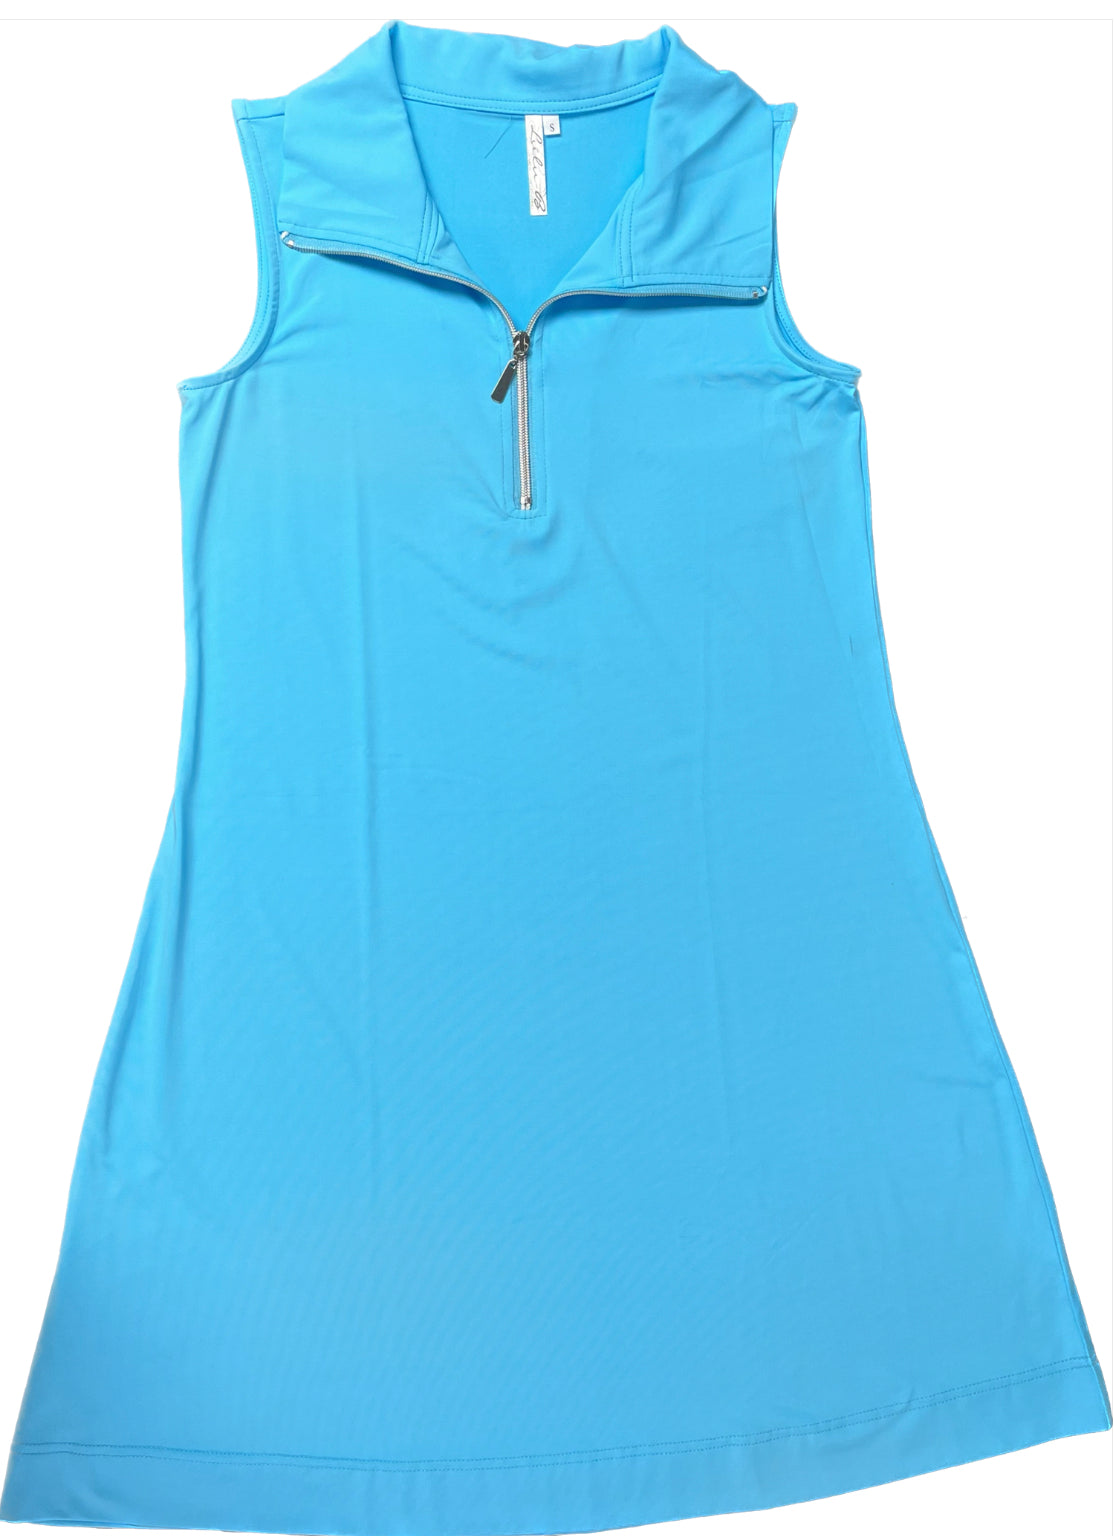 Clear Turquoise Swing Dress